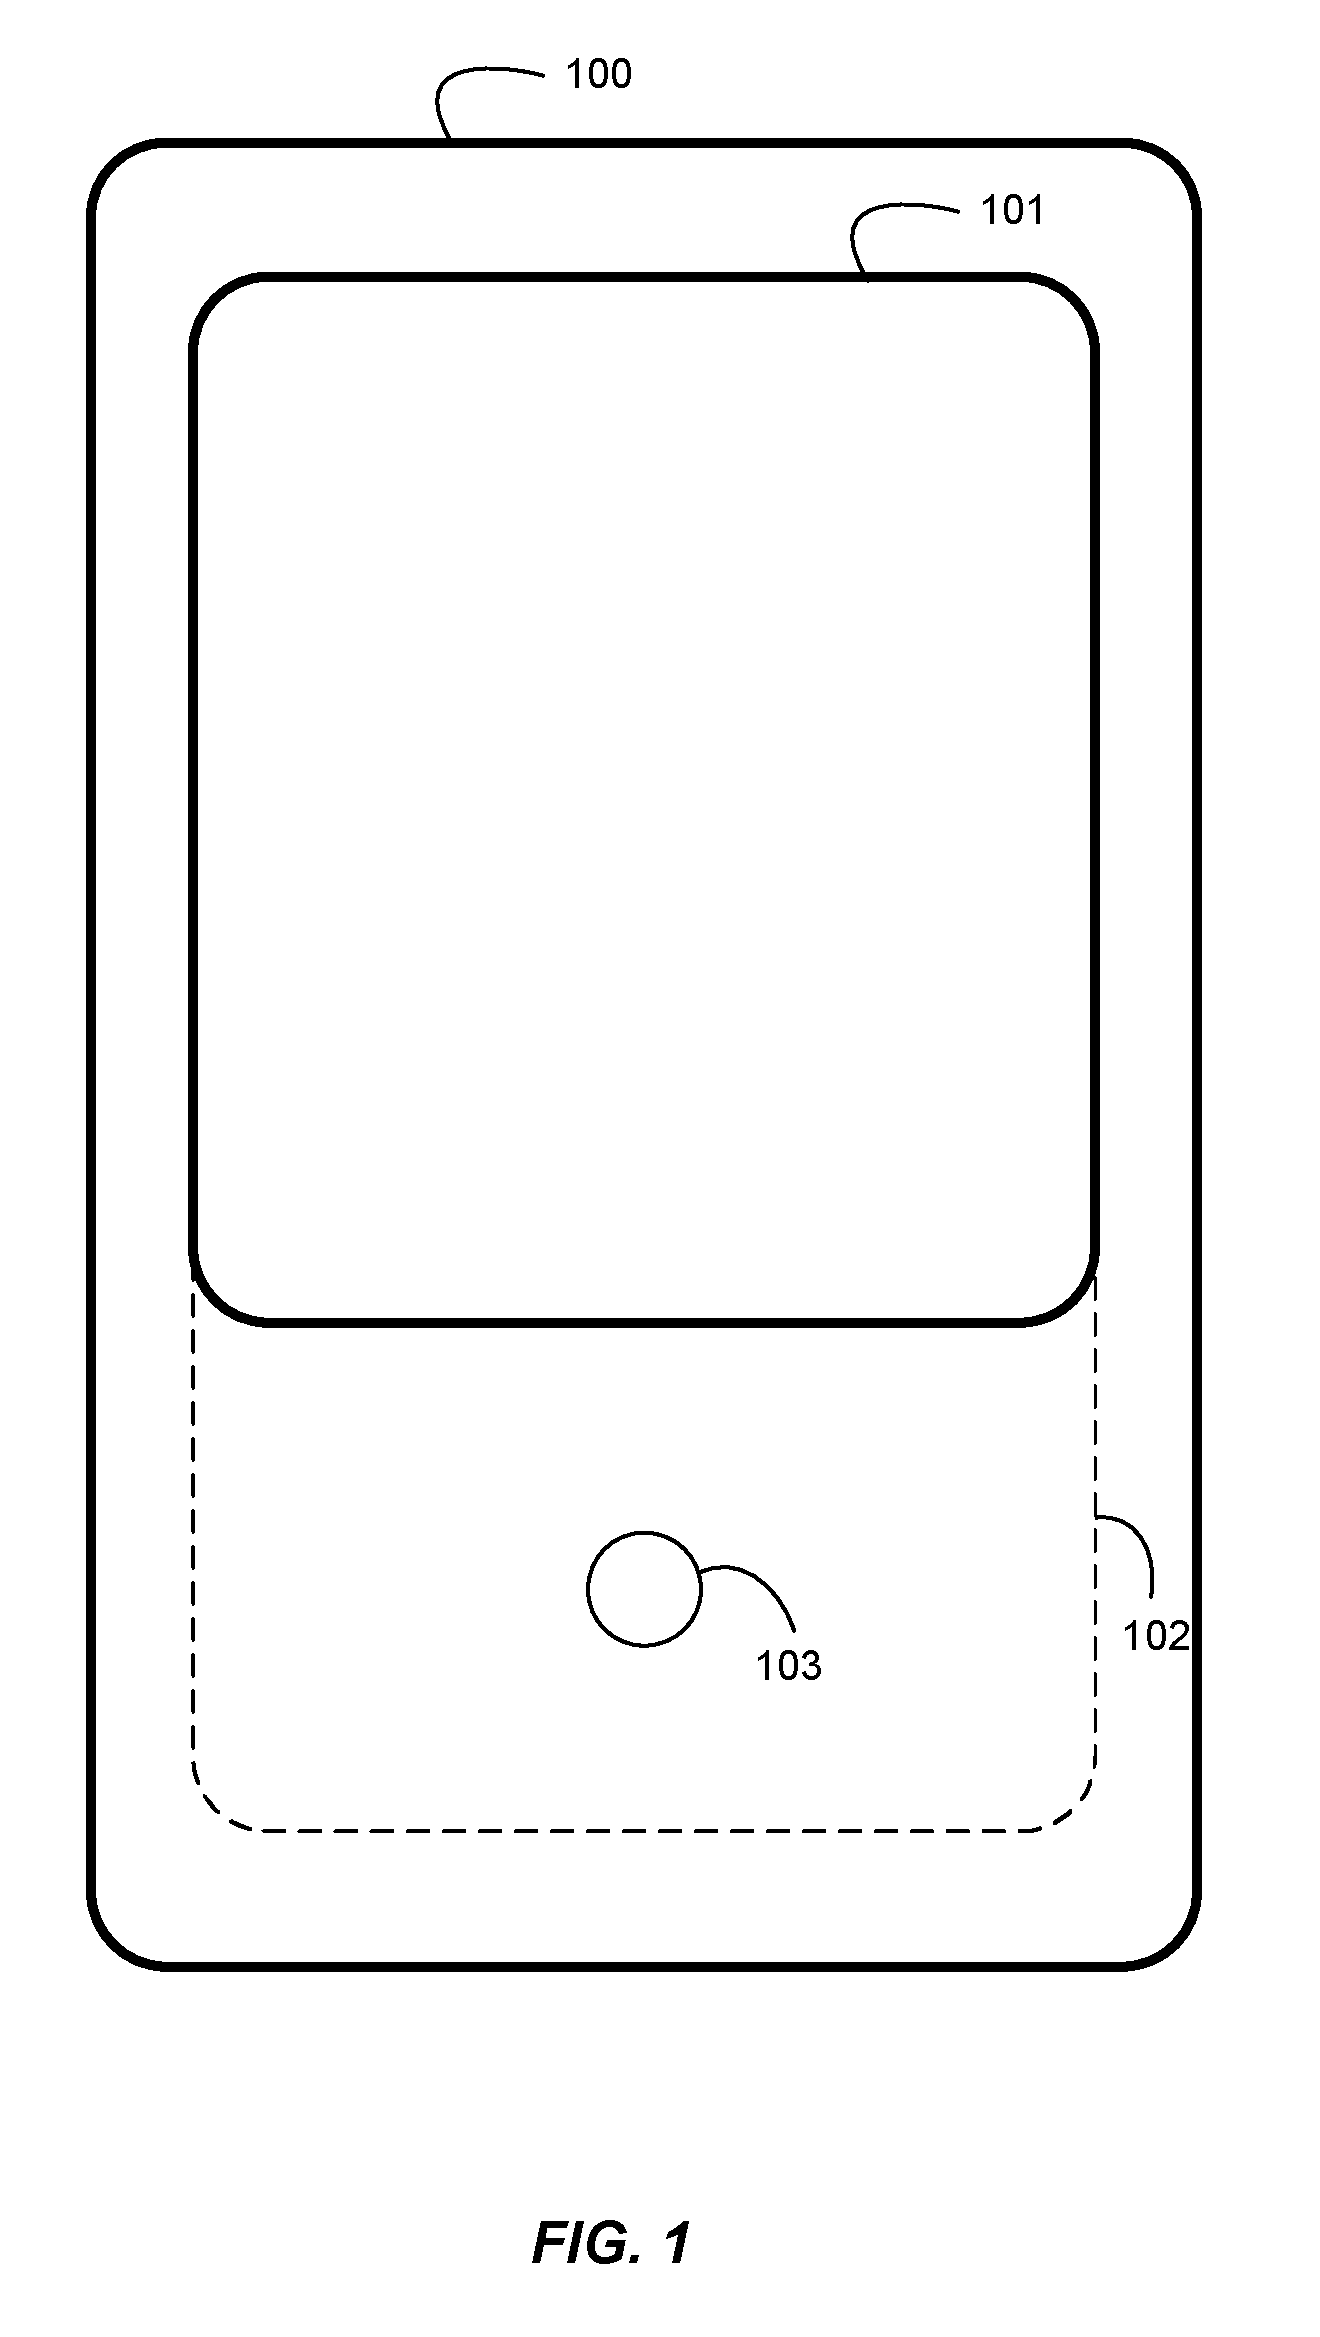 User Interface For Initiating Activities In An Electronic Device